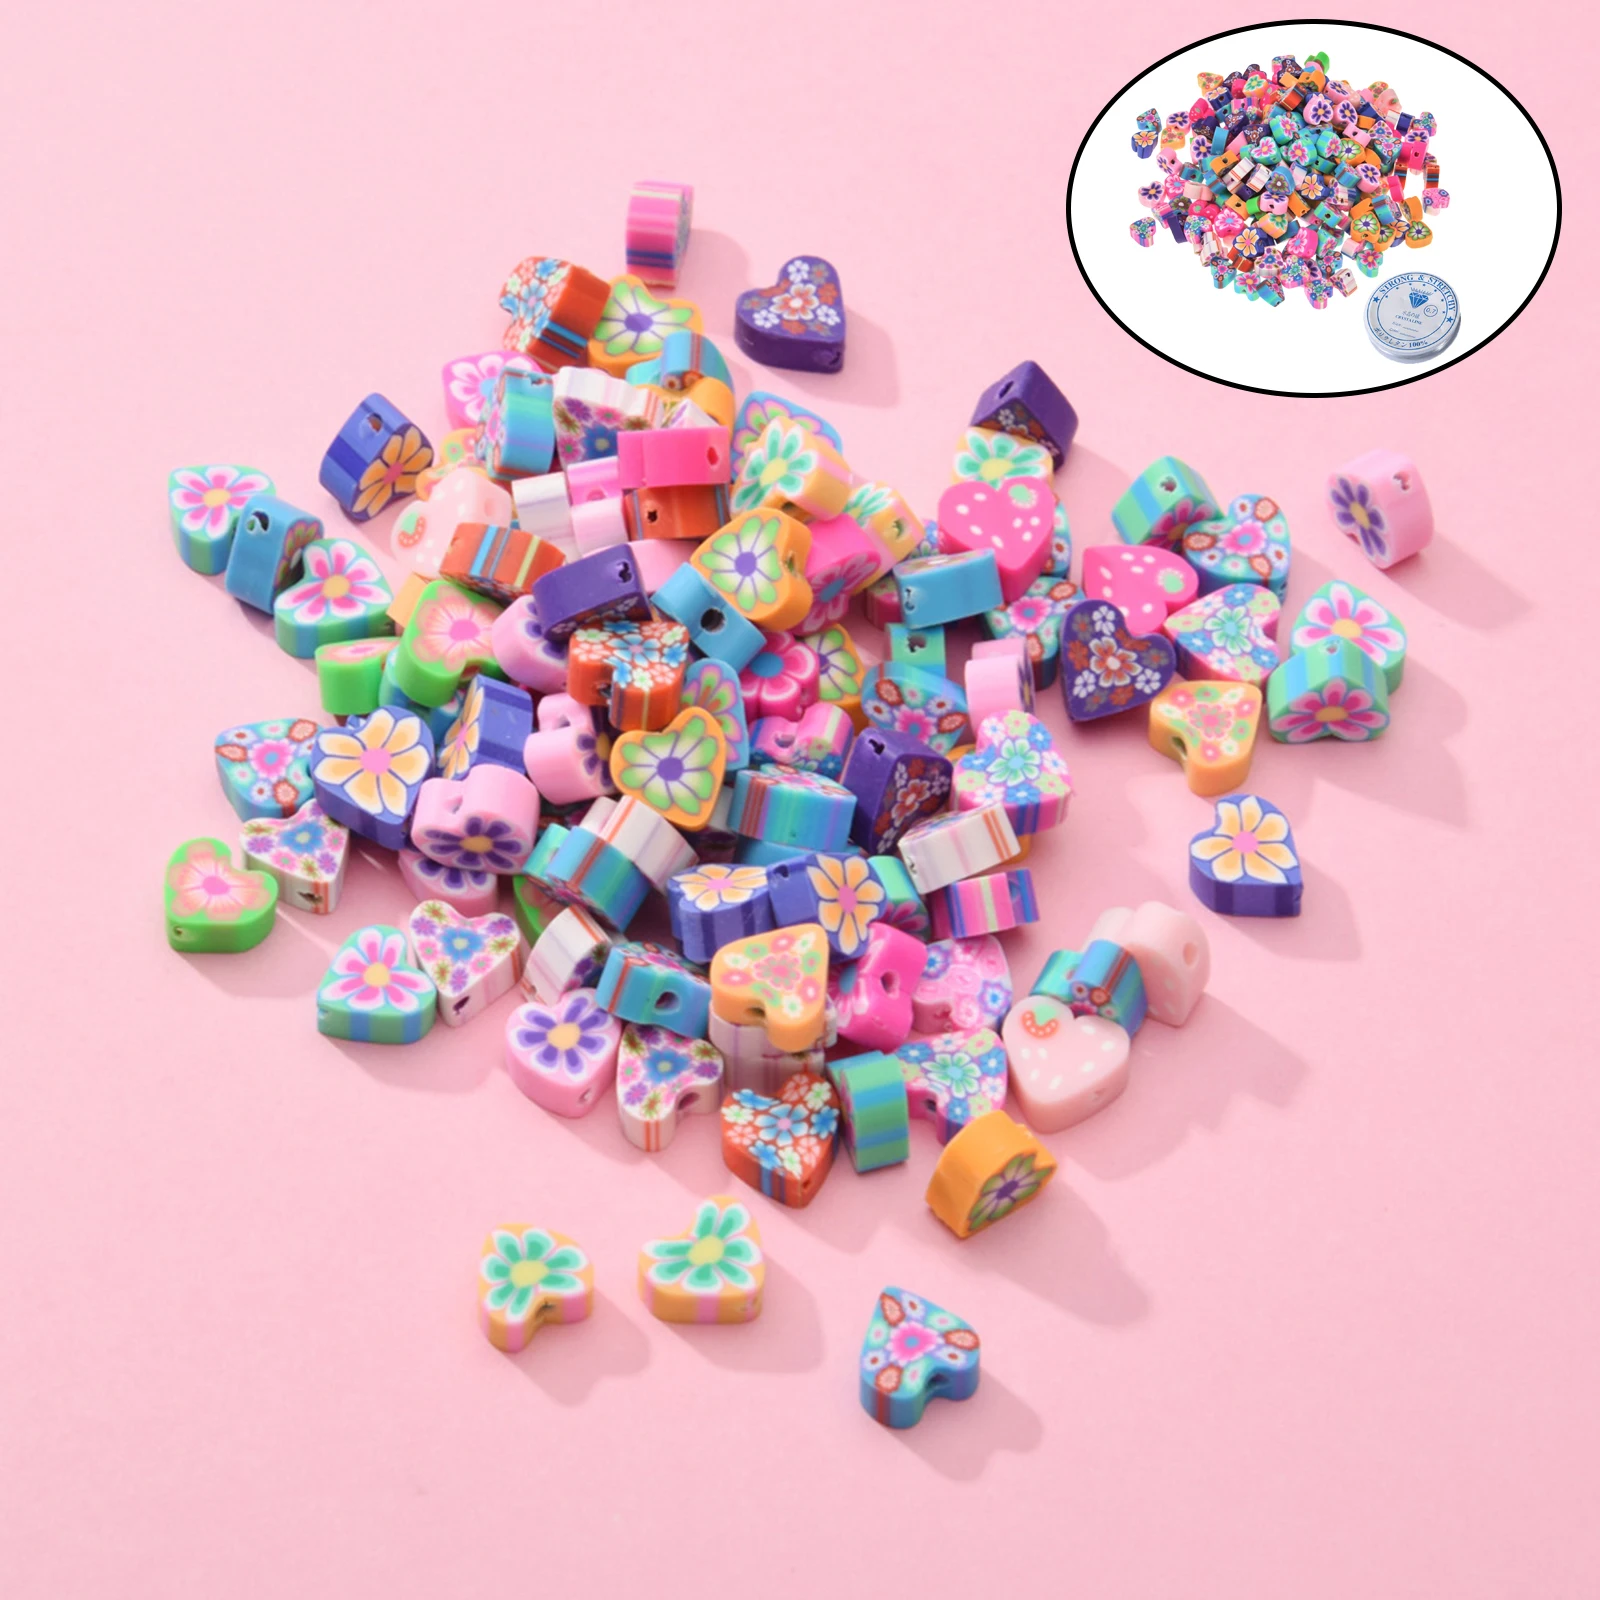 100pcs Colorful Beads for Necklace Jewelry Making Cream Phone Shell Bracelets DIY Accessories Soft Pottery With Elastic Wire